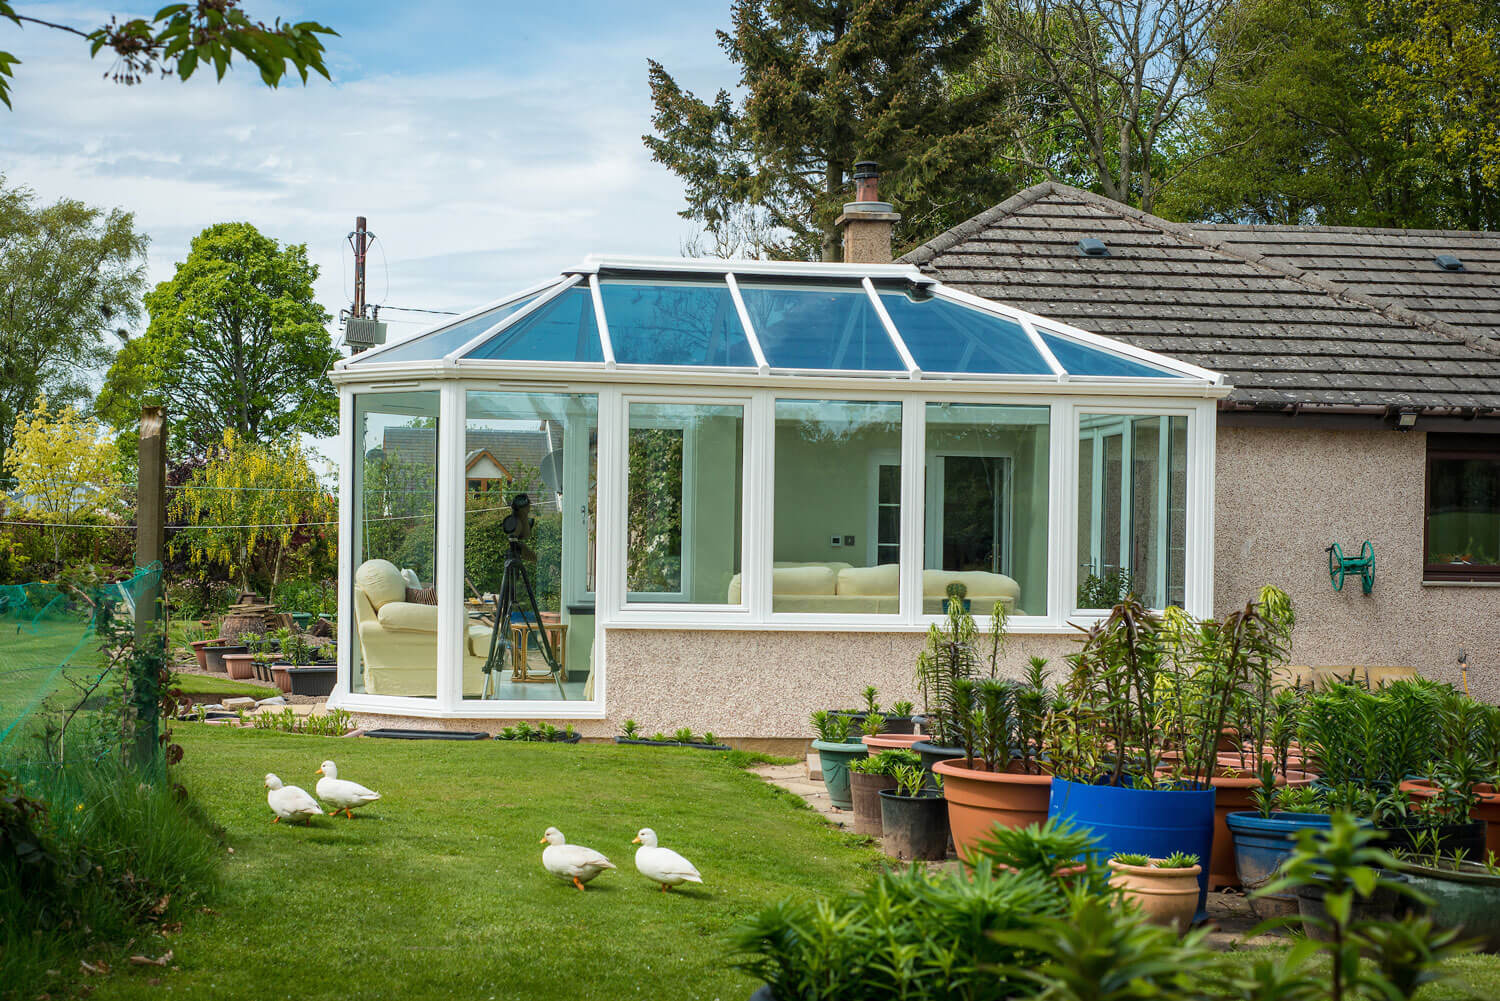 What Does SRJ Sunrooms Do For The Environment?